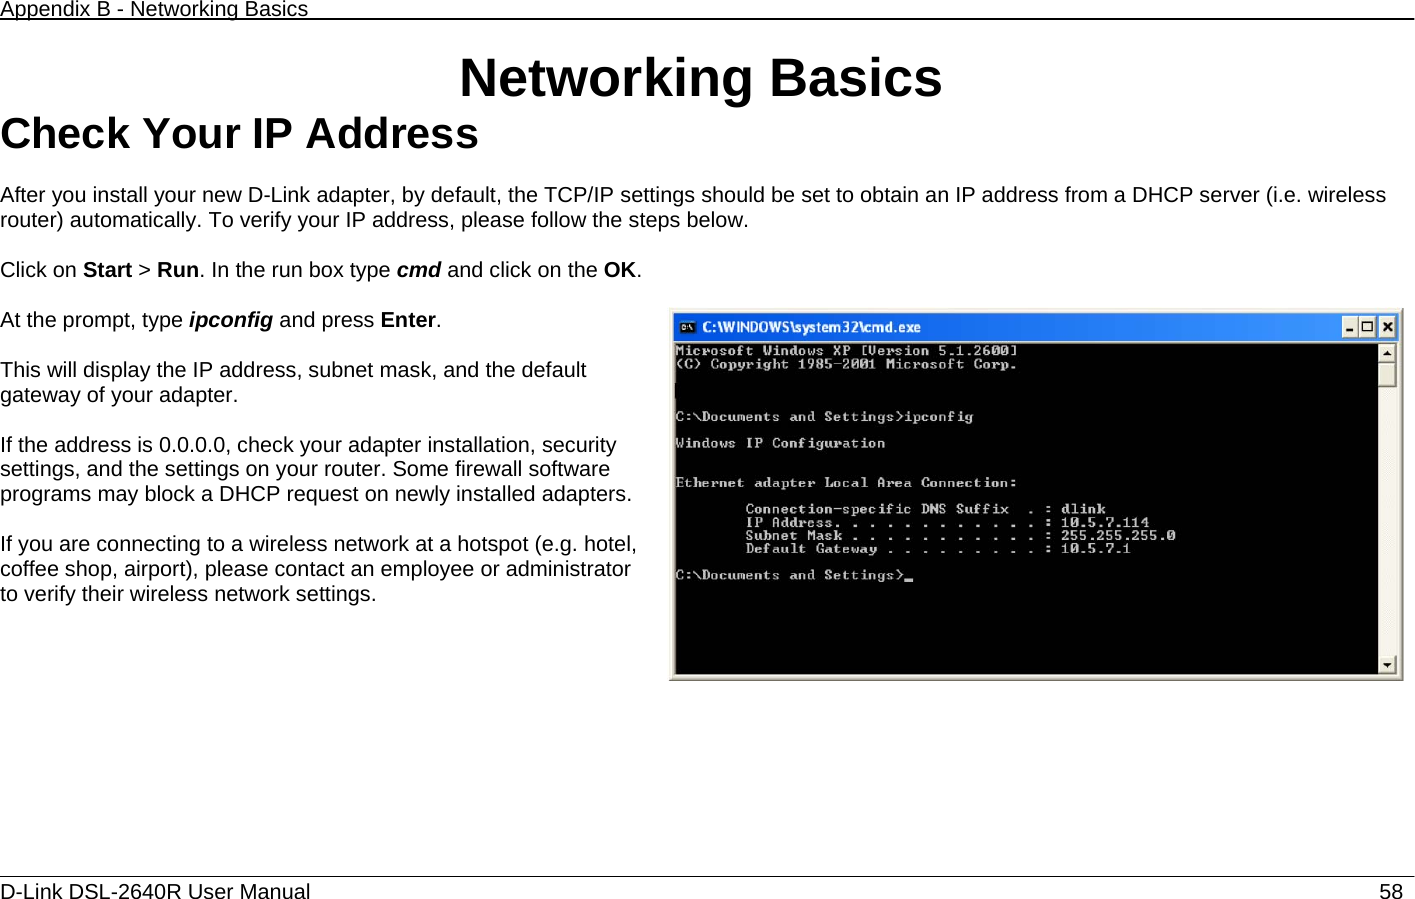 Appendix B - Networking Basics   D-Link DSL-2640R User Manual                           58Networking Basics Check Your IP Address  After you install your new D-Link adapter, by default, the TCP/IP settings should be set to obtain an IP address from a DHCP server (i.e. wireless router) automatically. To verify your IP address, please follow the steps below.  Click on Start &gt; Run. In the run box type cmd and click on the OK.  At the prompt, type ipconfig and press Enter.  This will display the IP address, subnet mask, and the default gateway of your adapter.  If the address is 0.0.0.0, check your adapter installation, security settings, and the settings on your router. Some firewall software programs may block a DHCP request on newly installed adapters.  If you are connecting to a wireless network at a hotspot (e.g. hotel, coffee shop, airport), please contact an employee or administrator to verify their wireless network settings.   